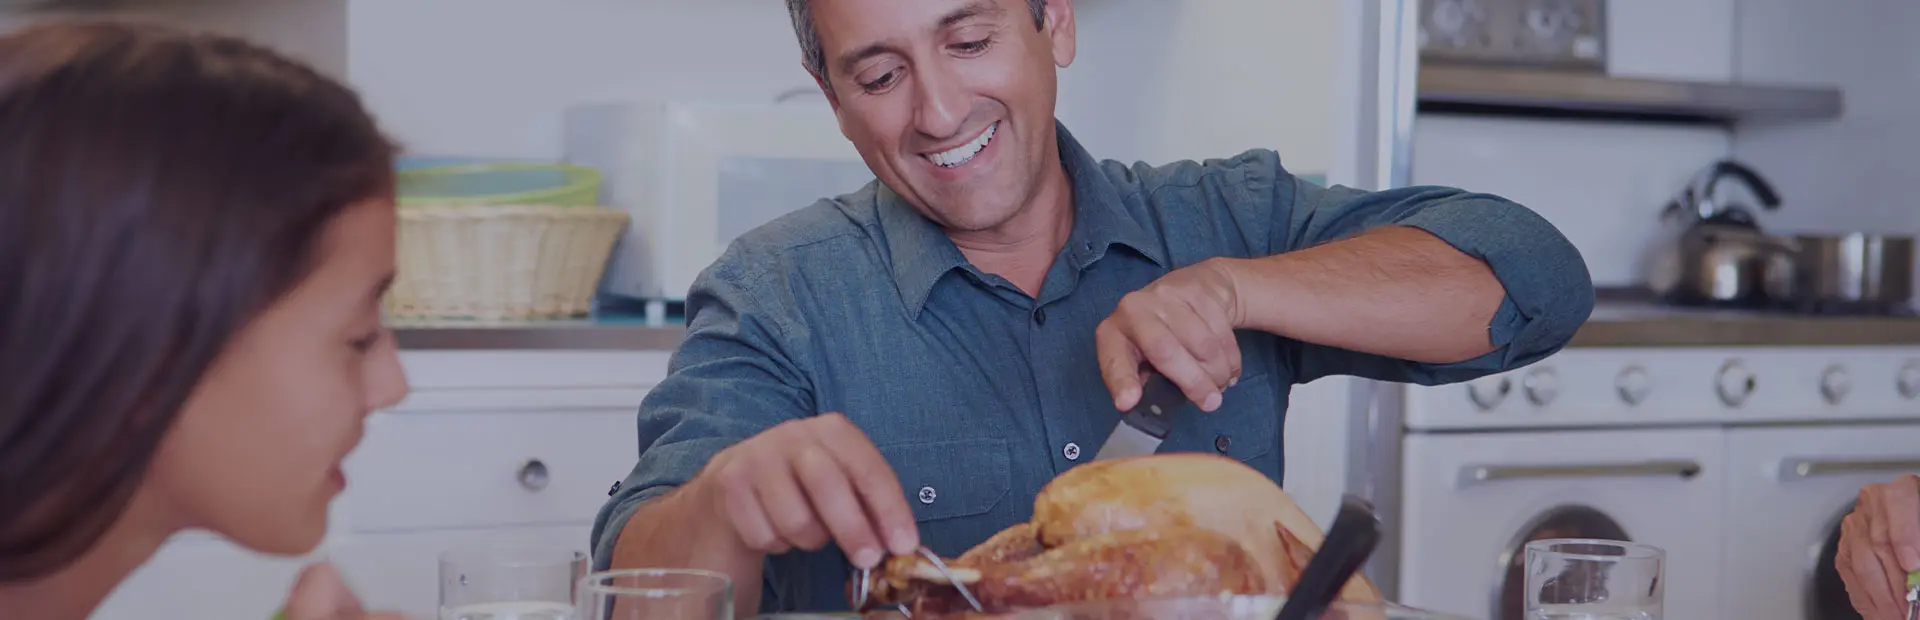 A man in his fifties is carving into a roast chicken, he is smiling because he knows he won't have any issues eating with dentures thanks to Fixodent's tips. 